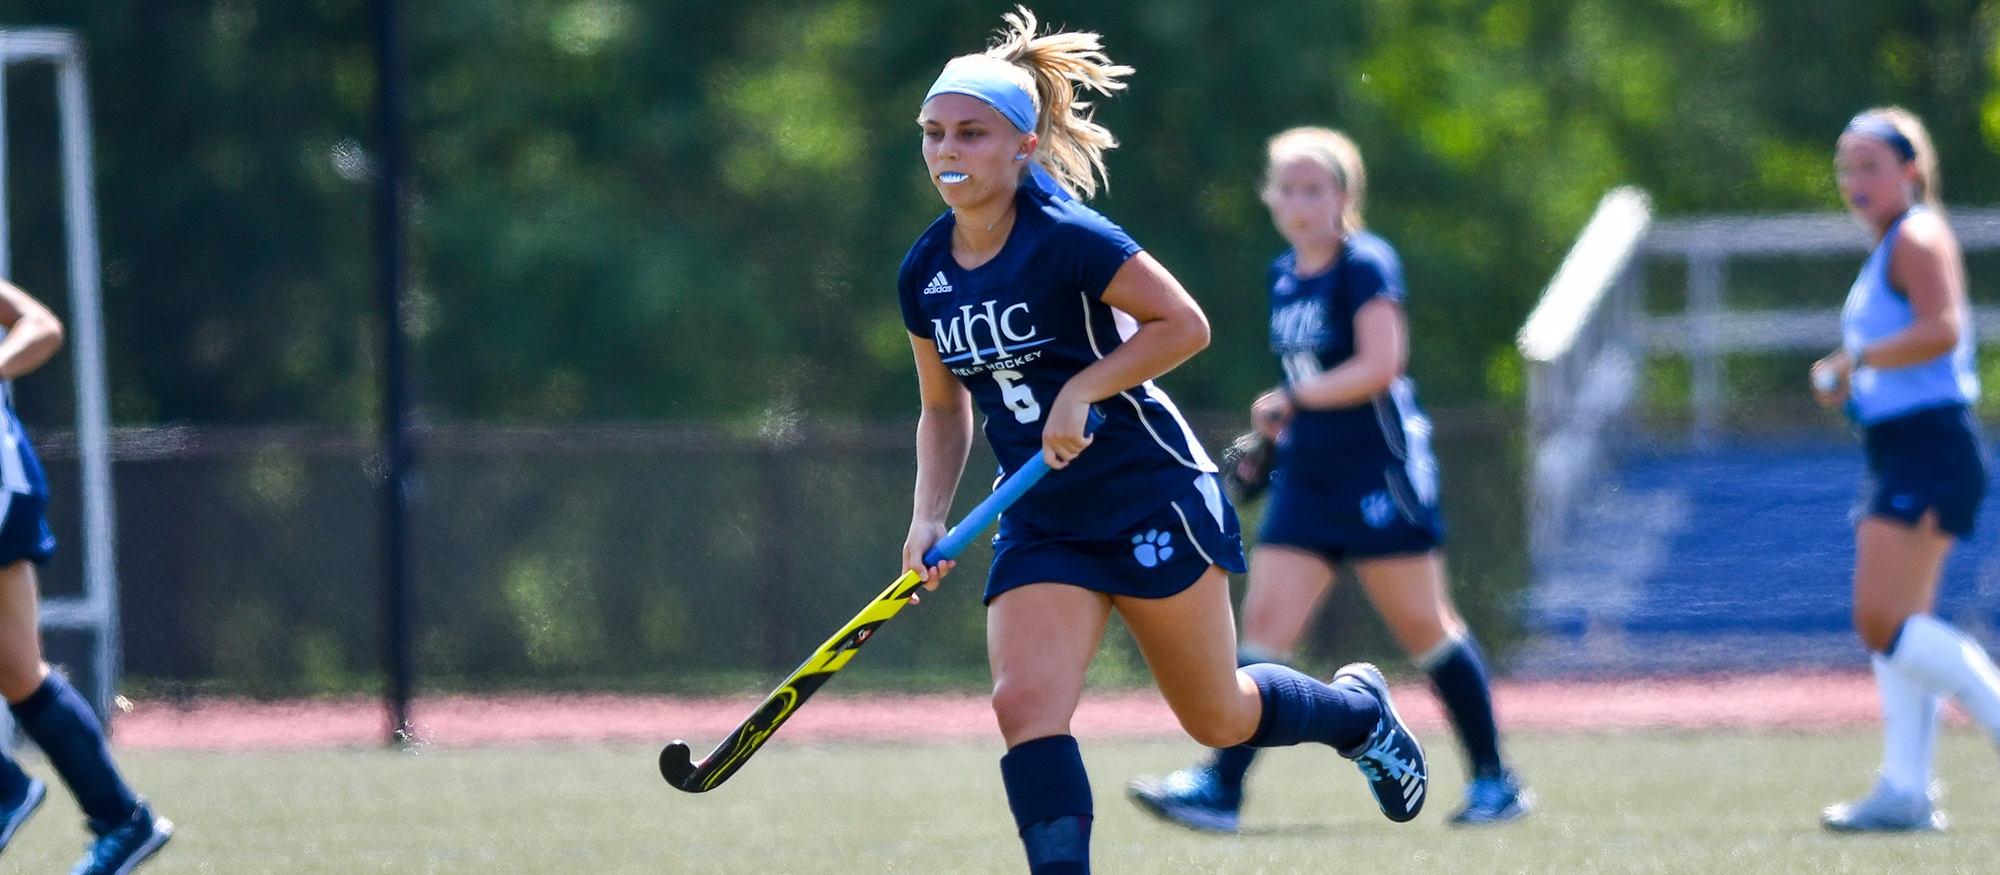 Lawrence Strikes Late to Lift Field Hockey to 3-2 Win at Thomas College